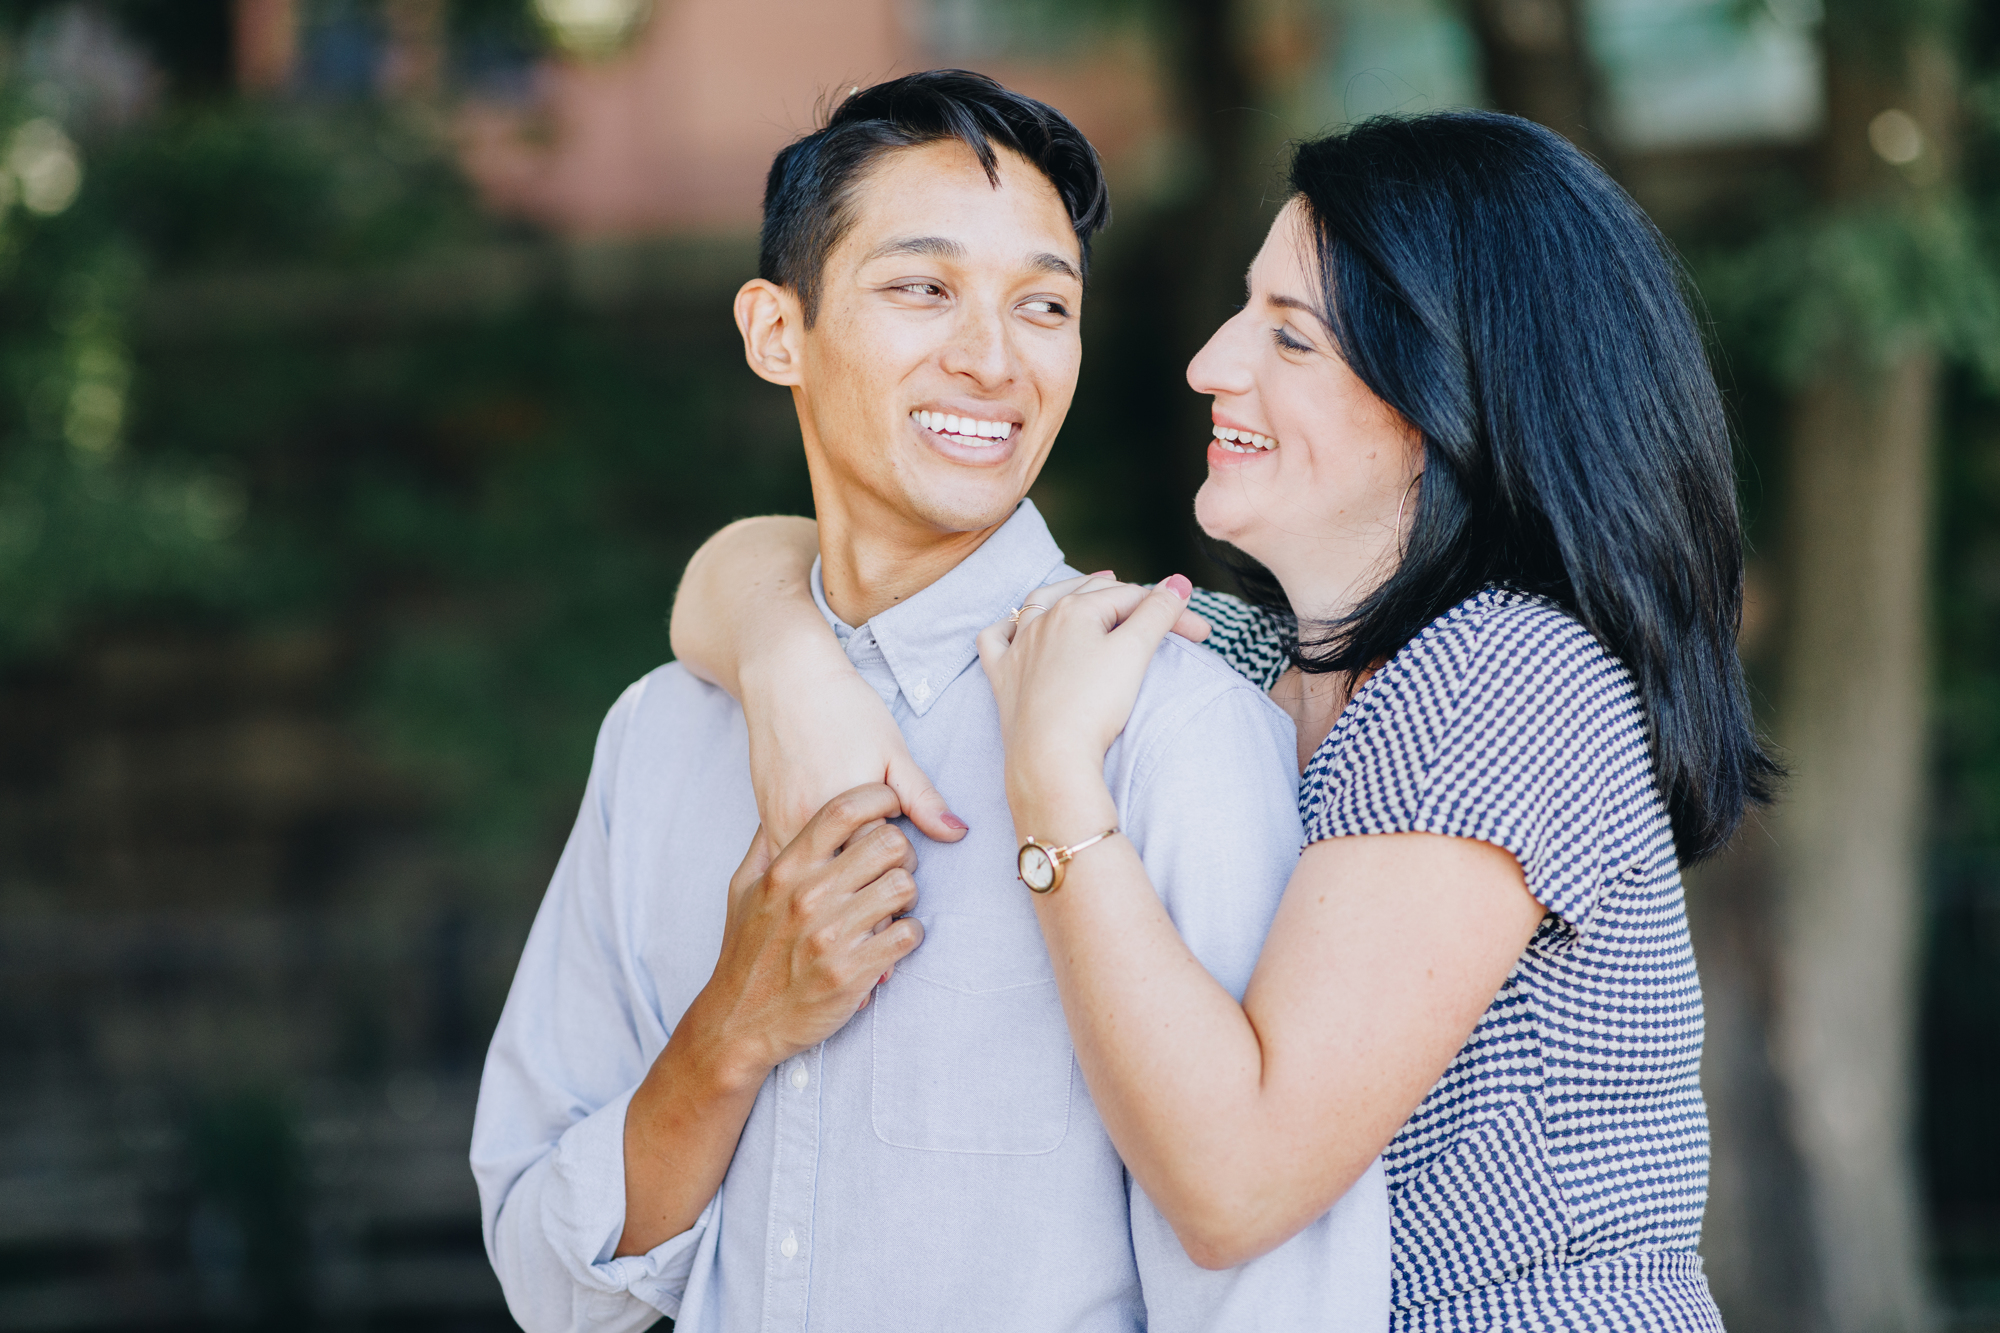 Gorgeous Brooklyn Heights Promenade Engagement Photos in Summery New York